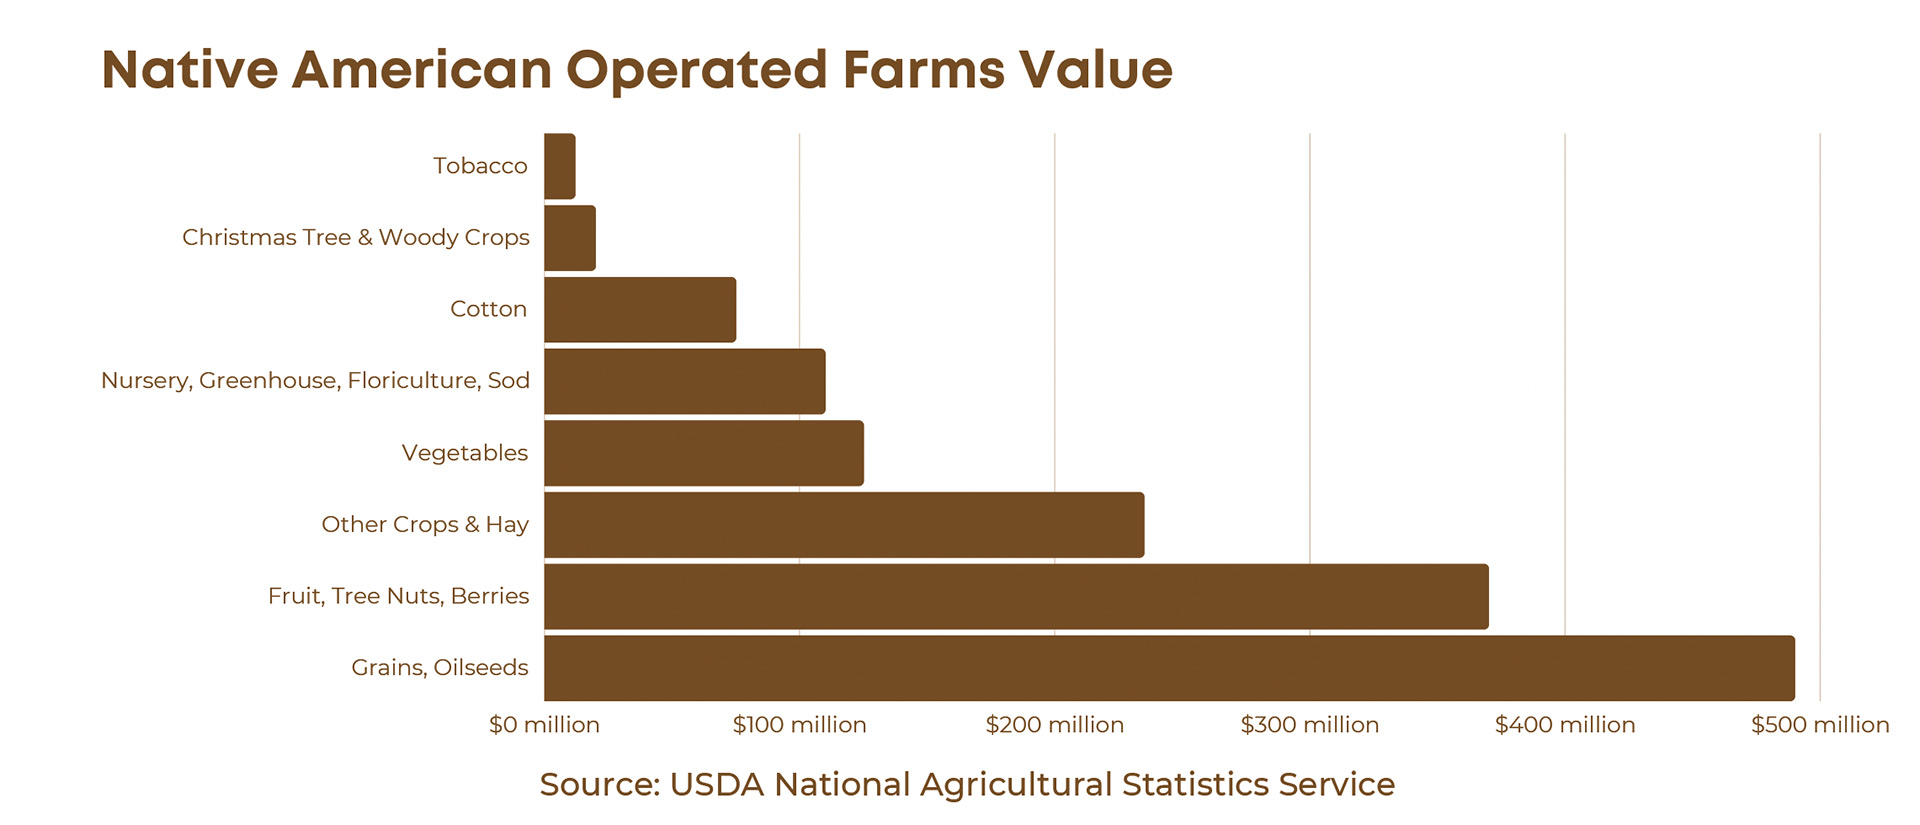 Native American Operated Farms Value